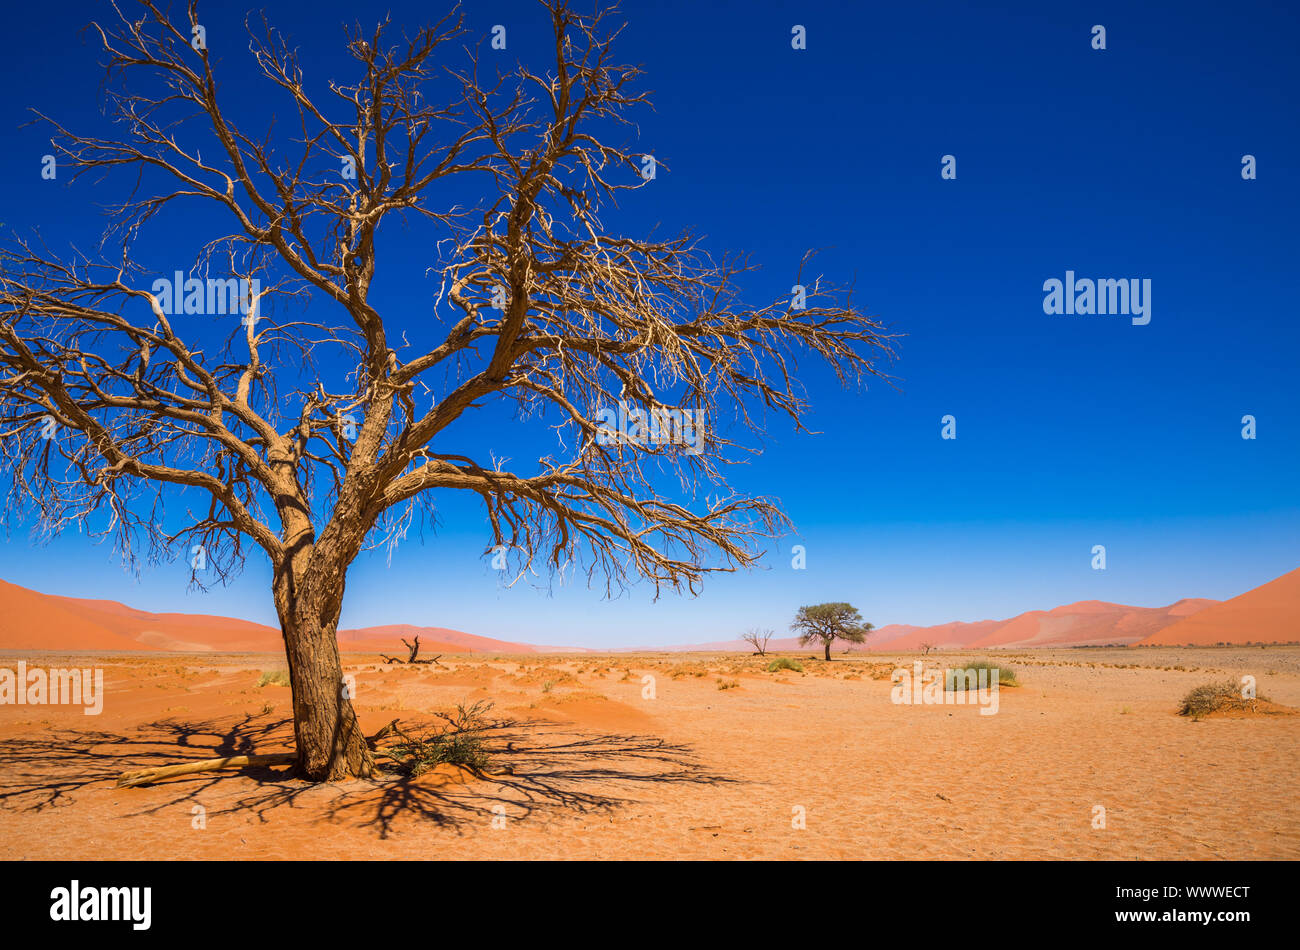 Dead Camelthorn Trees and red dunes in Sossusvlei, Namib-Naukluft National Park, Namibia Stock Photo